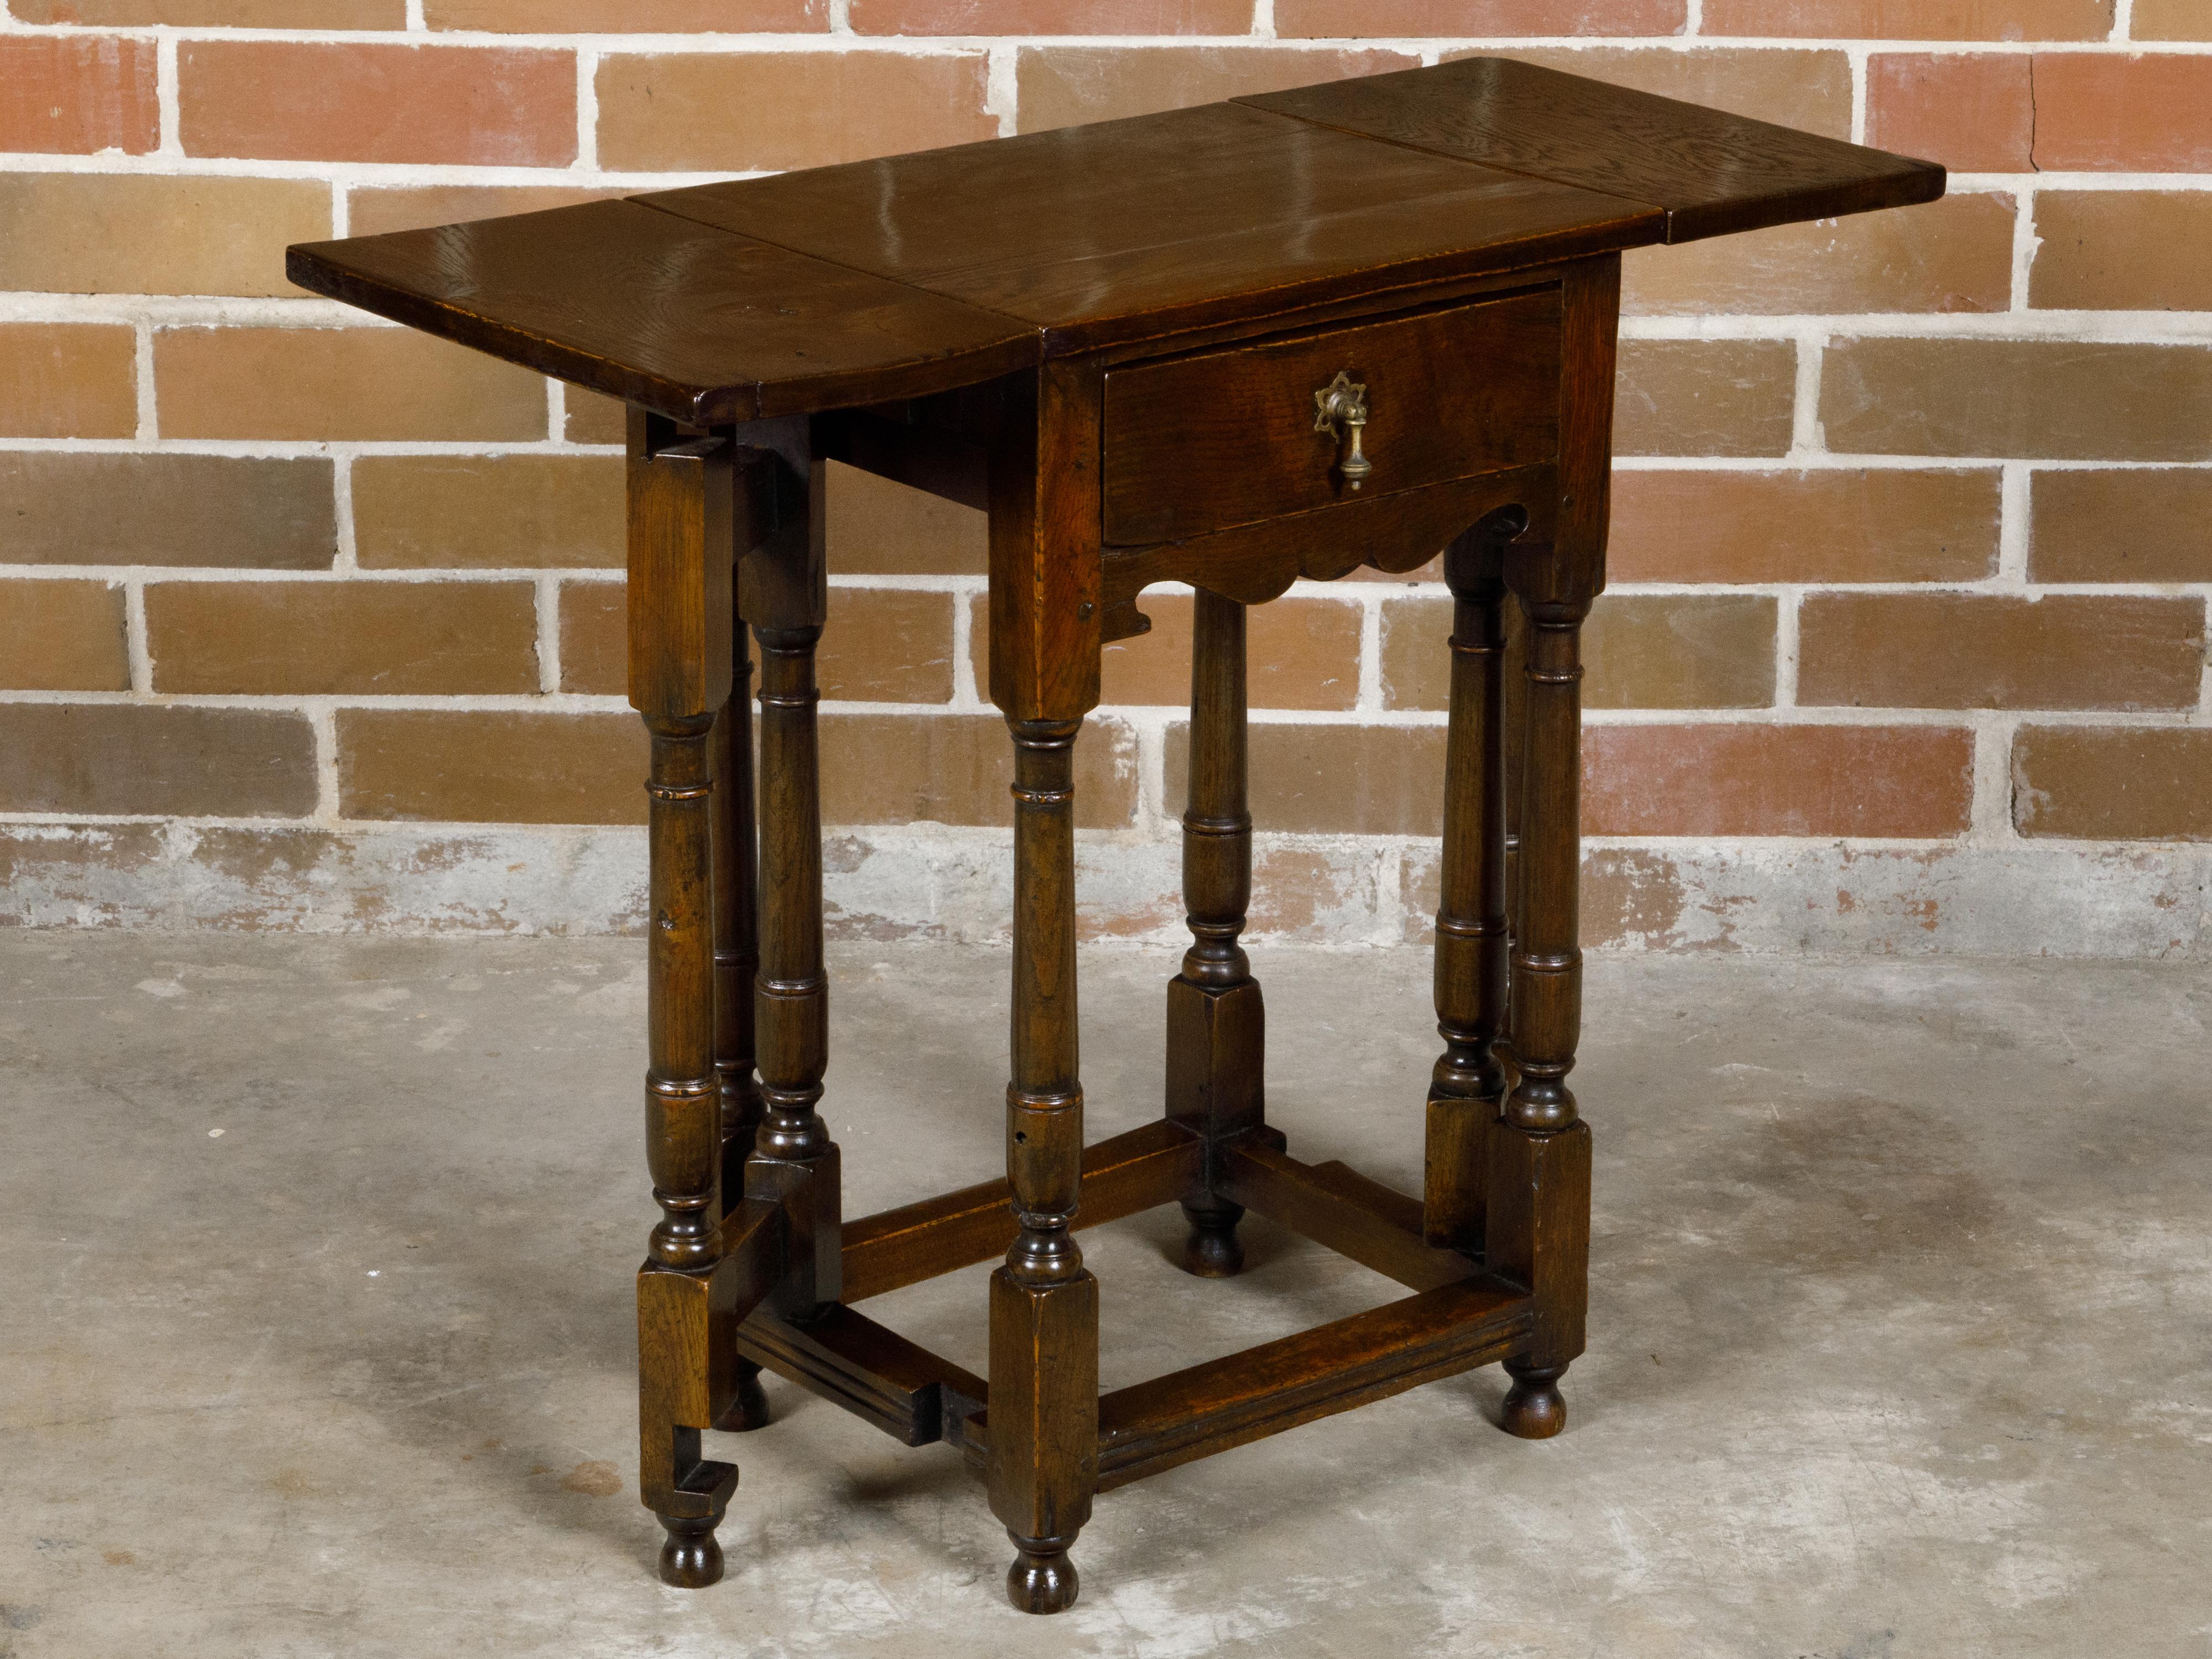 English 19th Century Oak Drop Leaf Table with Swivel Legs and Single Drawer For Sale 7